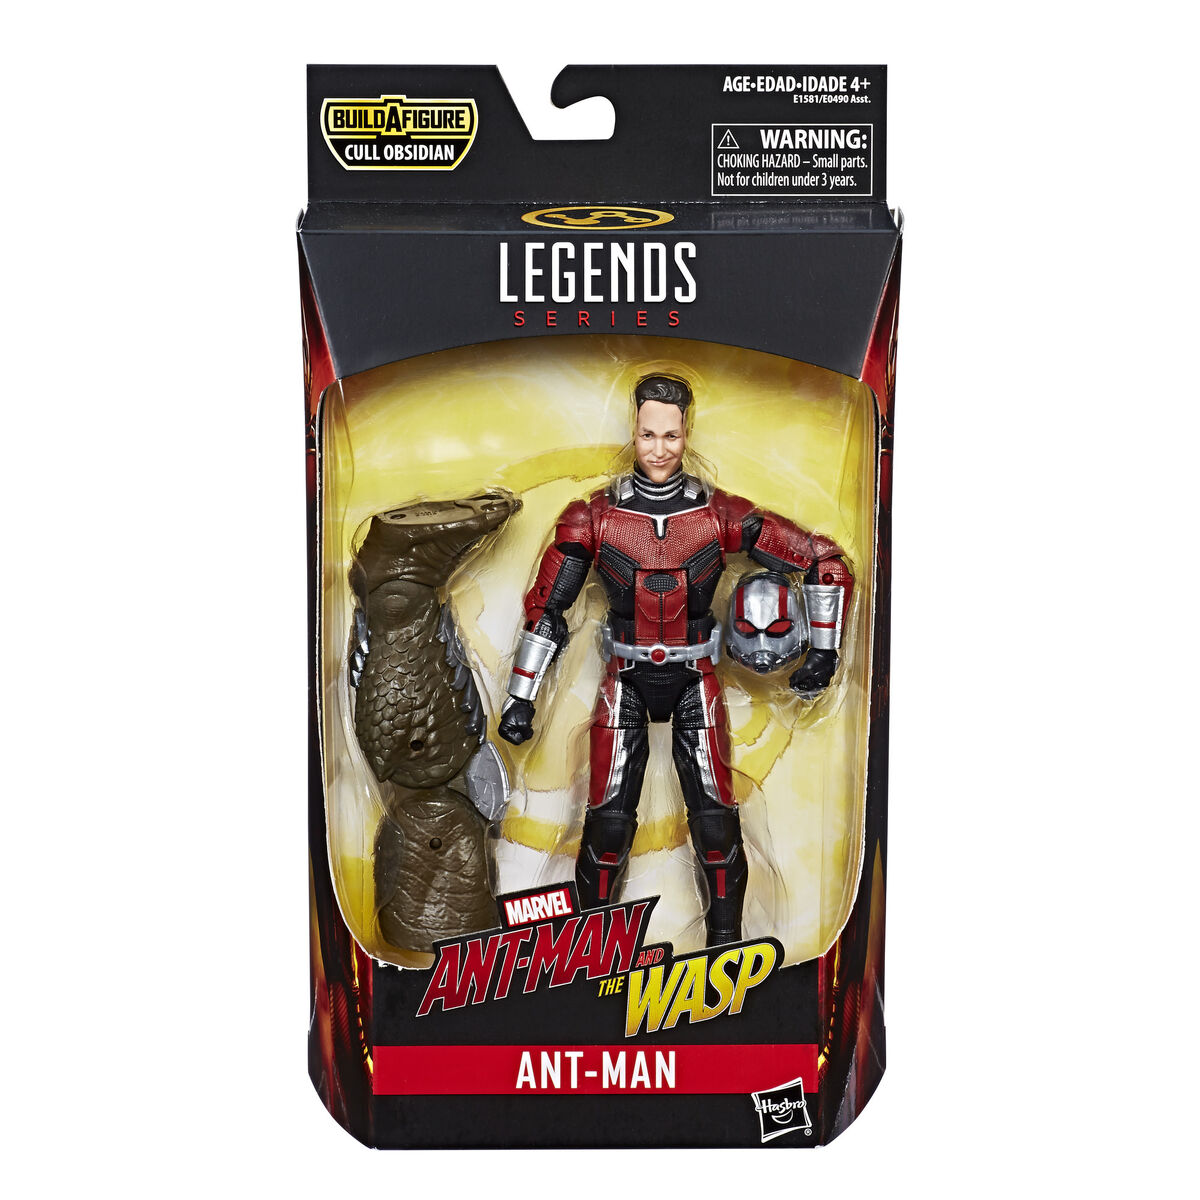 Ant-Man & the Wasp: Quantumania Marvel Legends Ant-Man 6-Inch